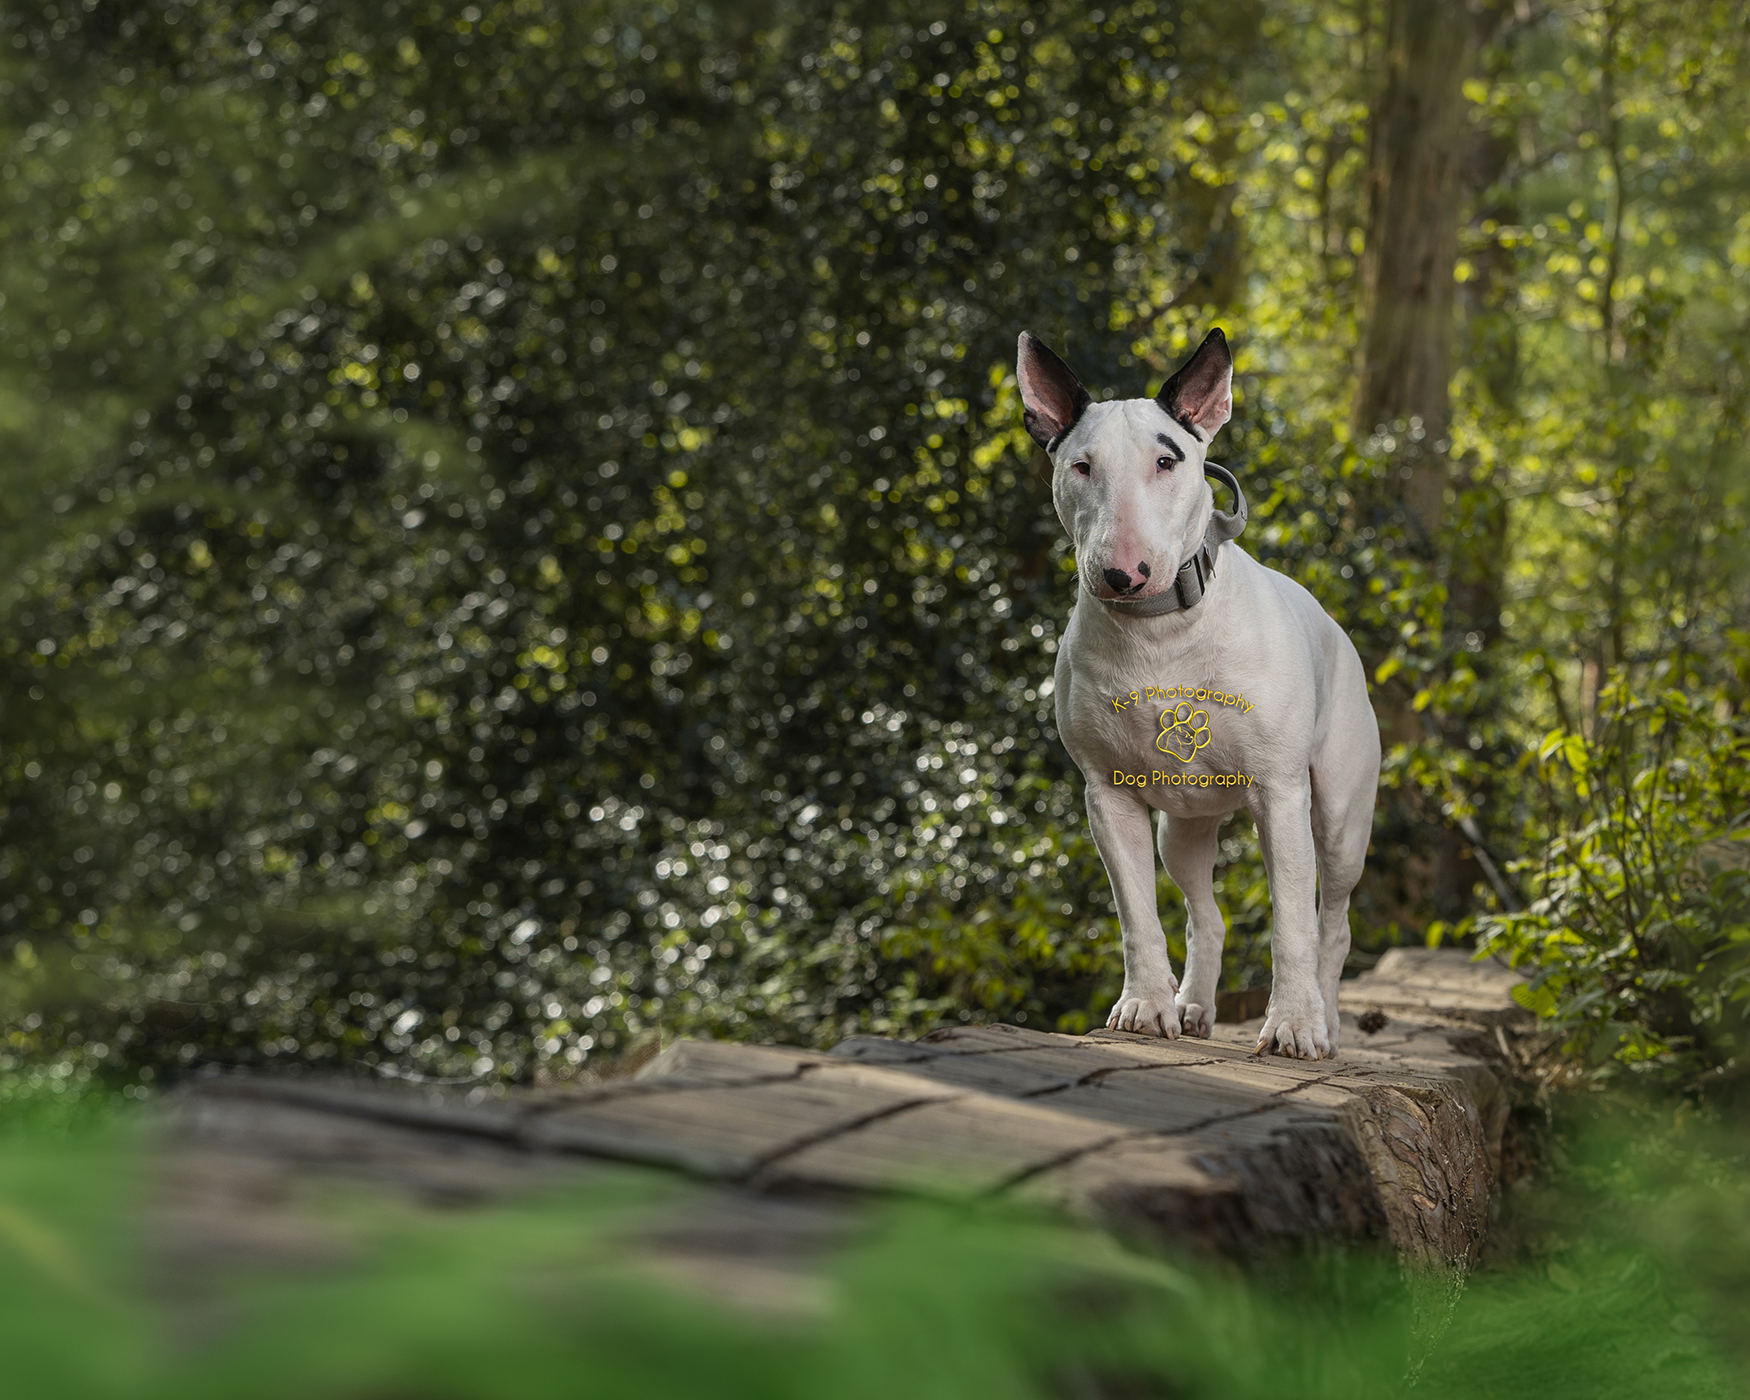 Beautiful location pet photography by Adrian Bullers an Award winning Pet photographer in the UK